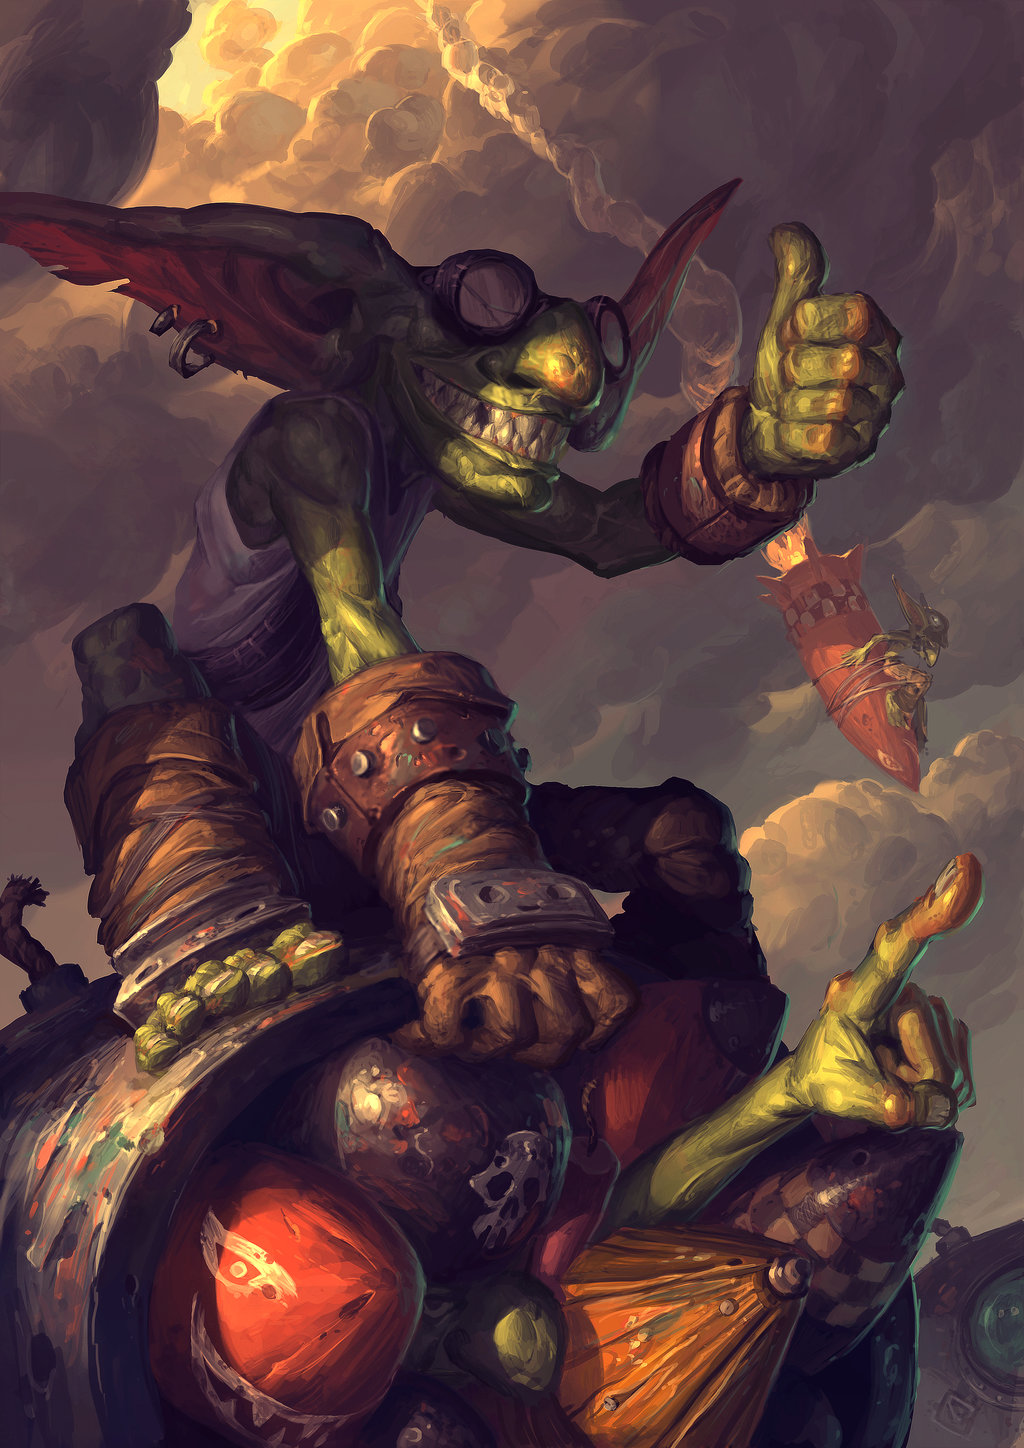 goblin_vs_gnomes_entry_by_edcid-d89t72f